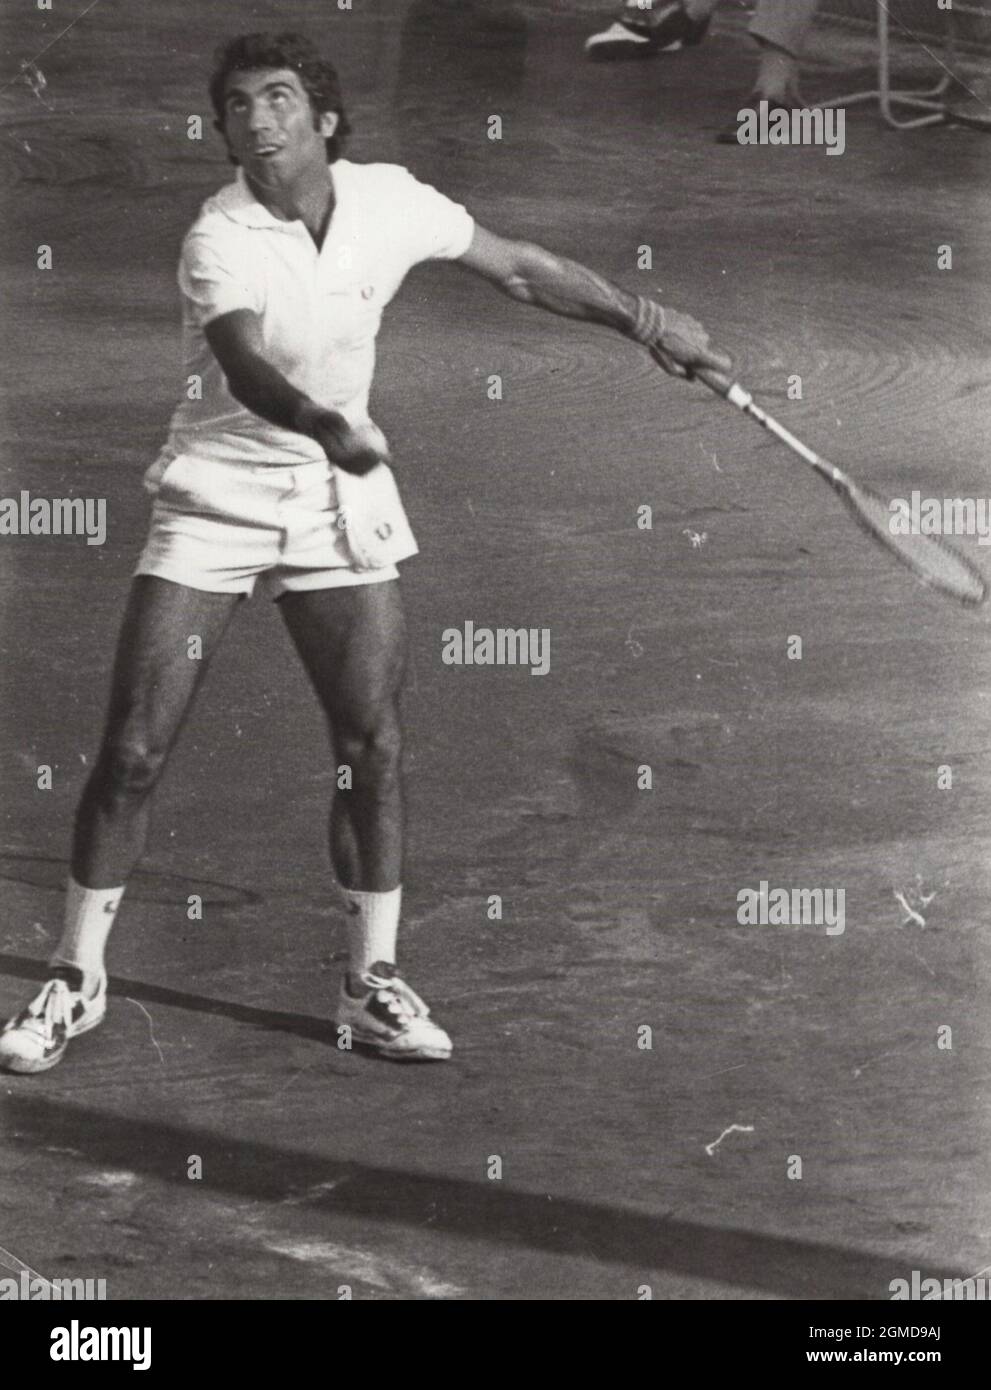 In action during Mens Singles Manuel Orantes tennis star serving at 1977  Stock Photo - Alamy